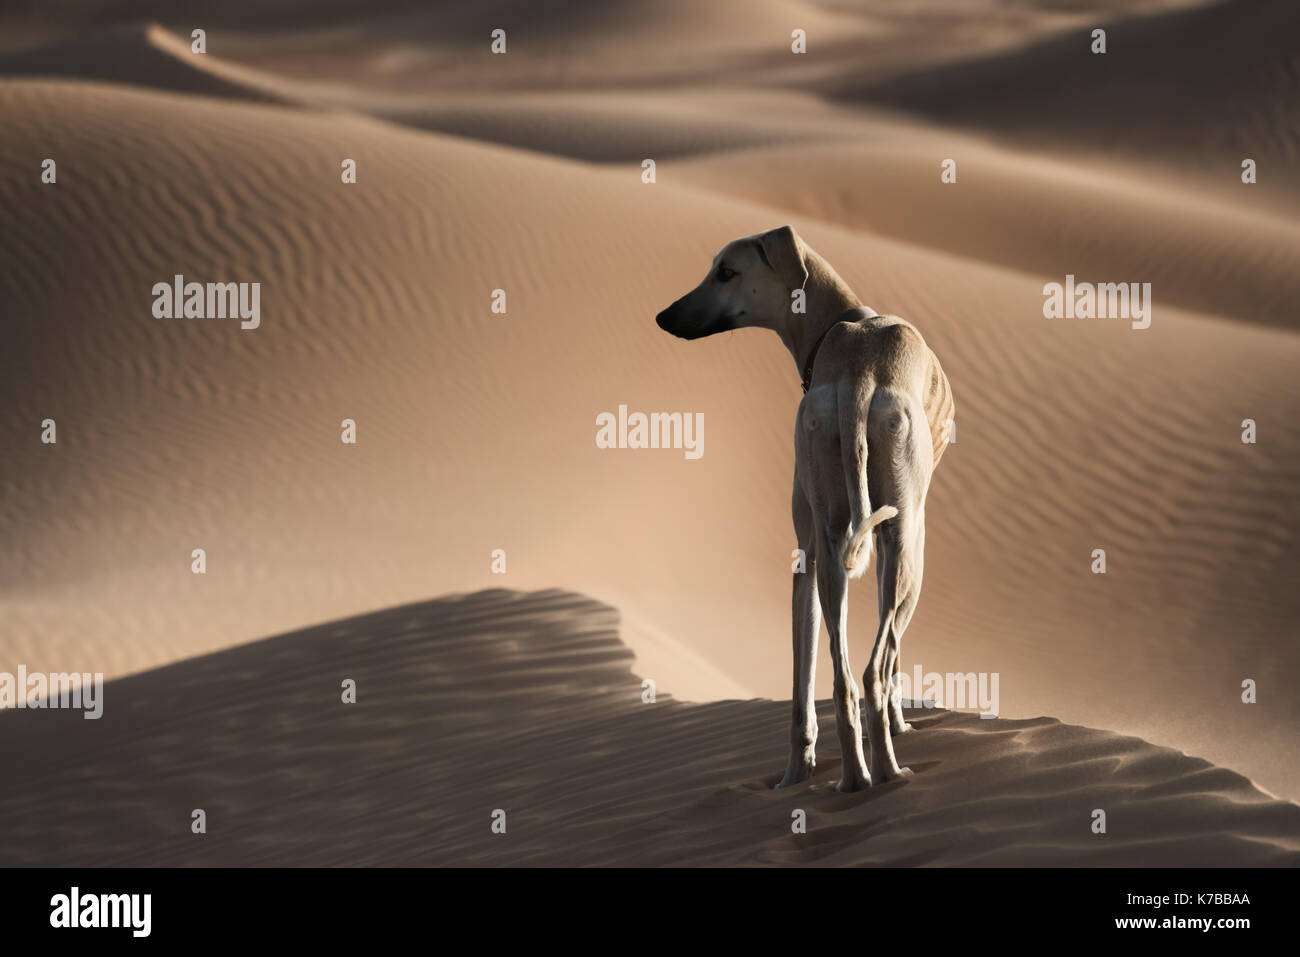 A Sloughi (Arabian greyhound) in the desert of Morocco. Stock Photo